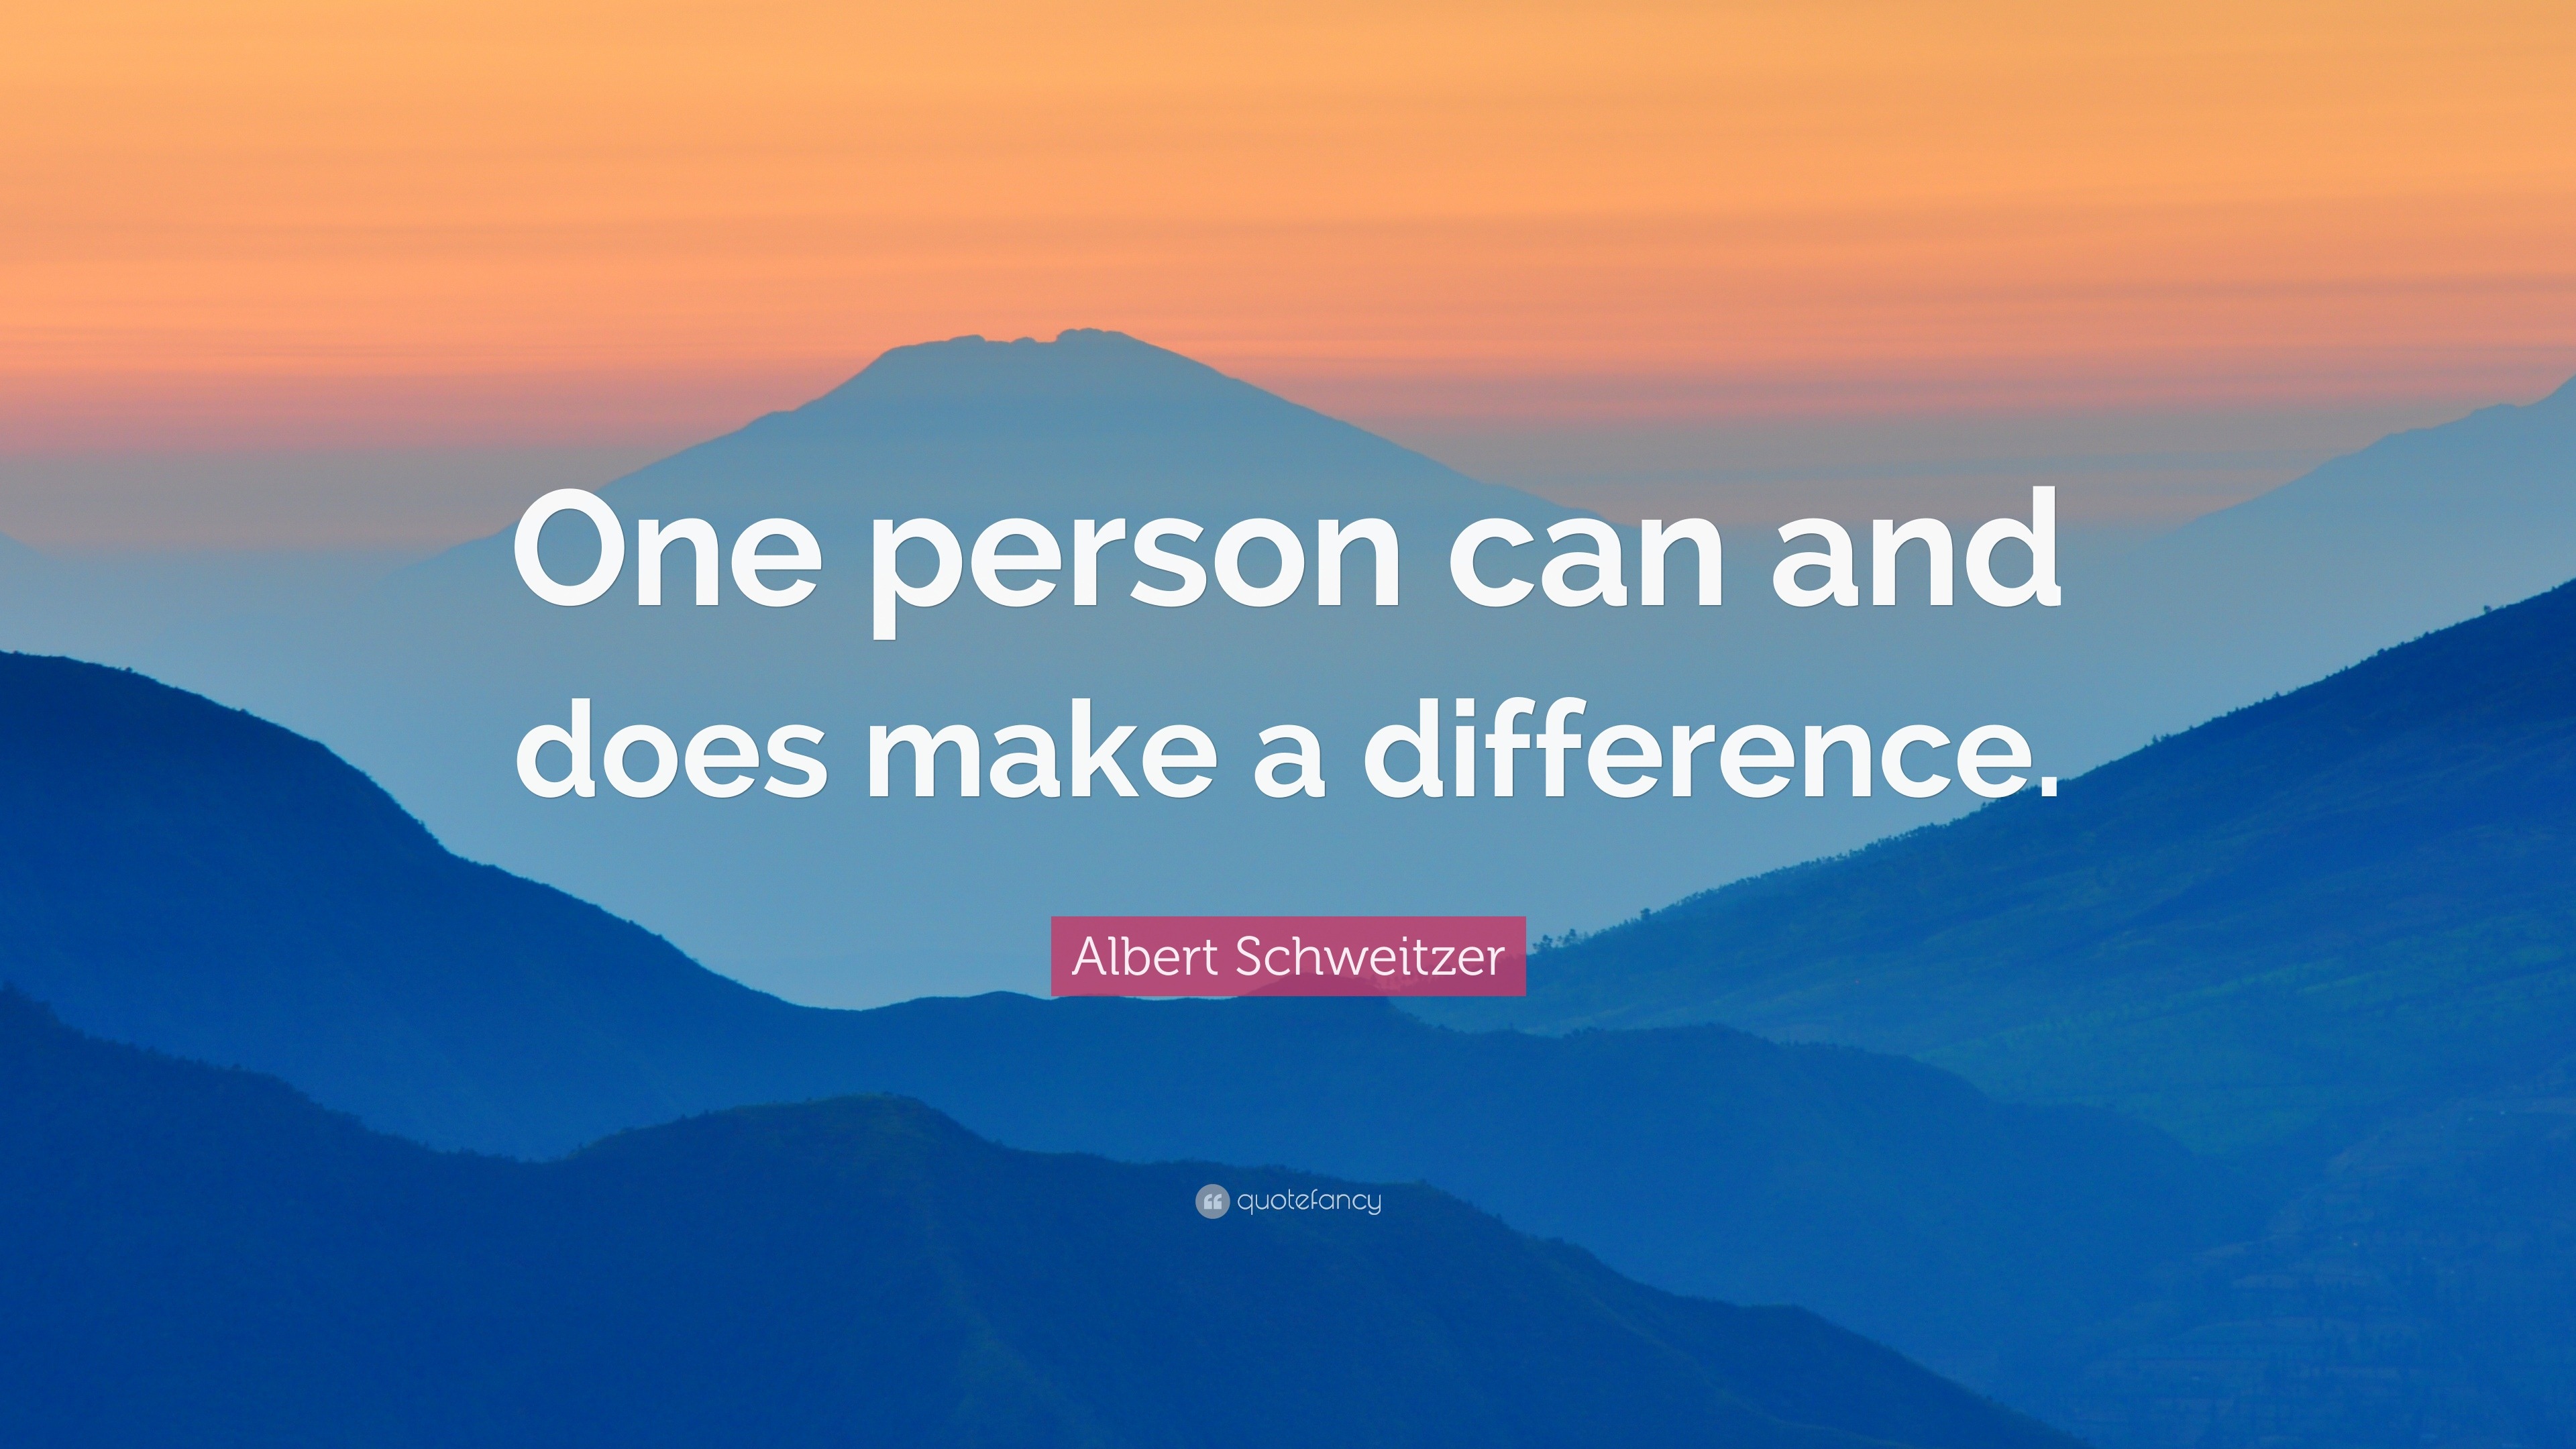 The Power of One: Inspiring Quotes on Making a Difference